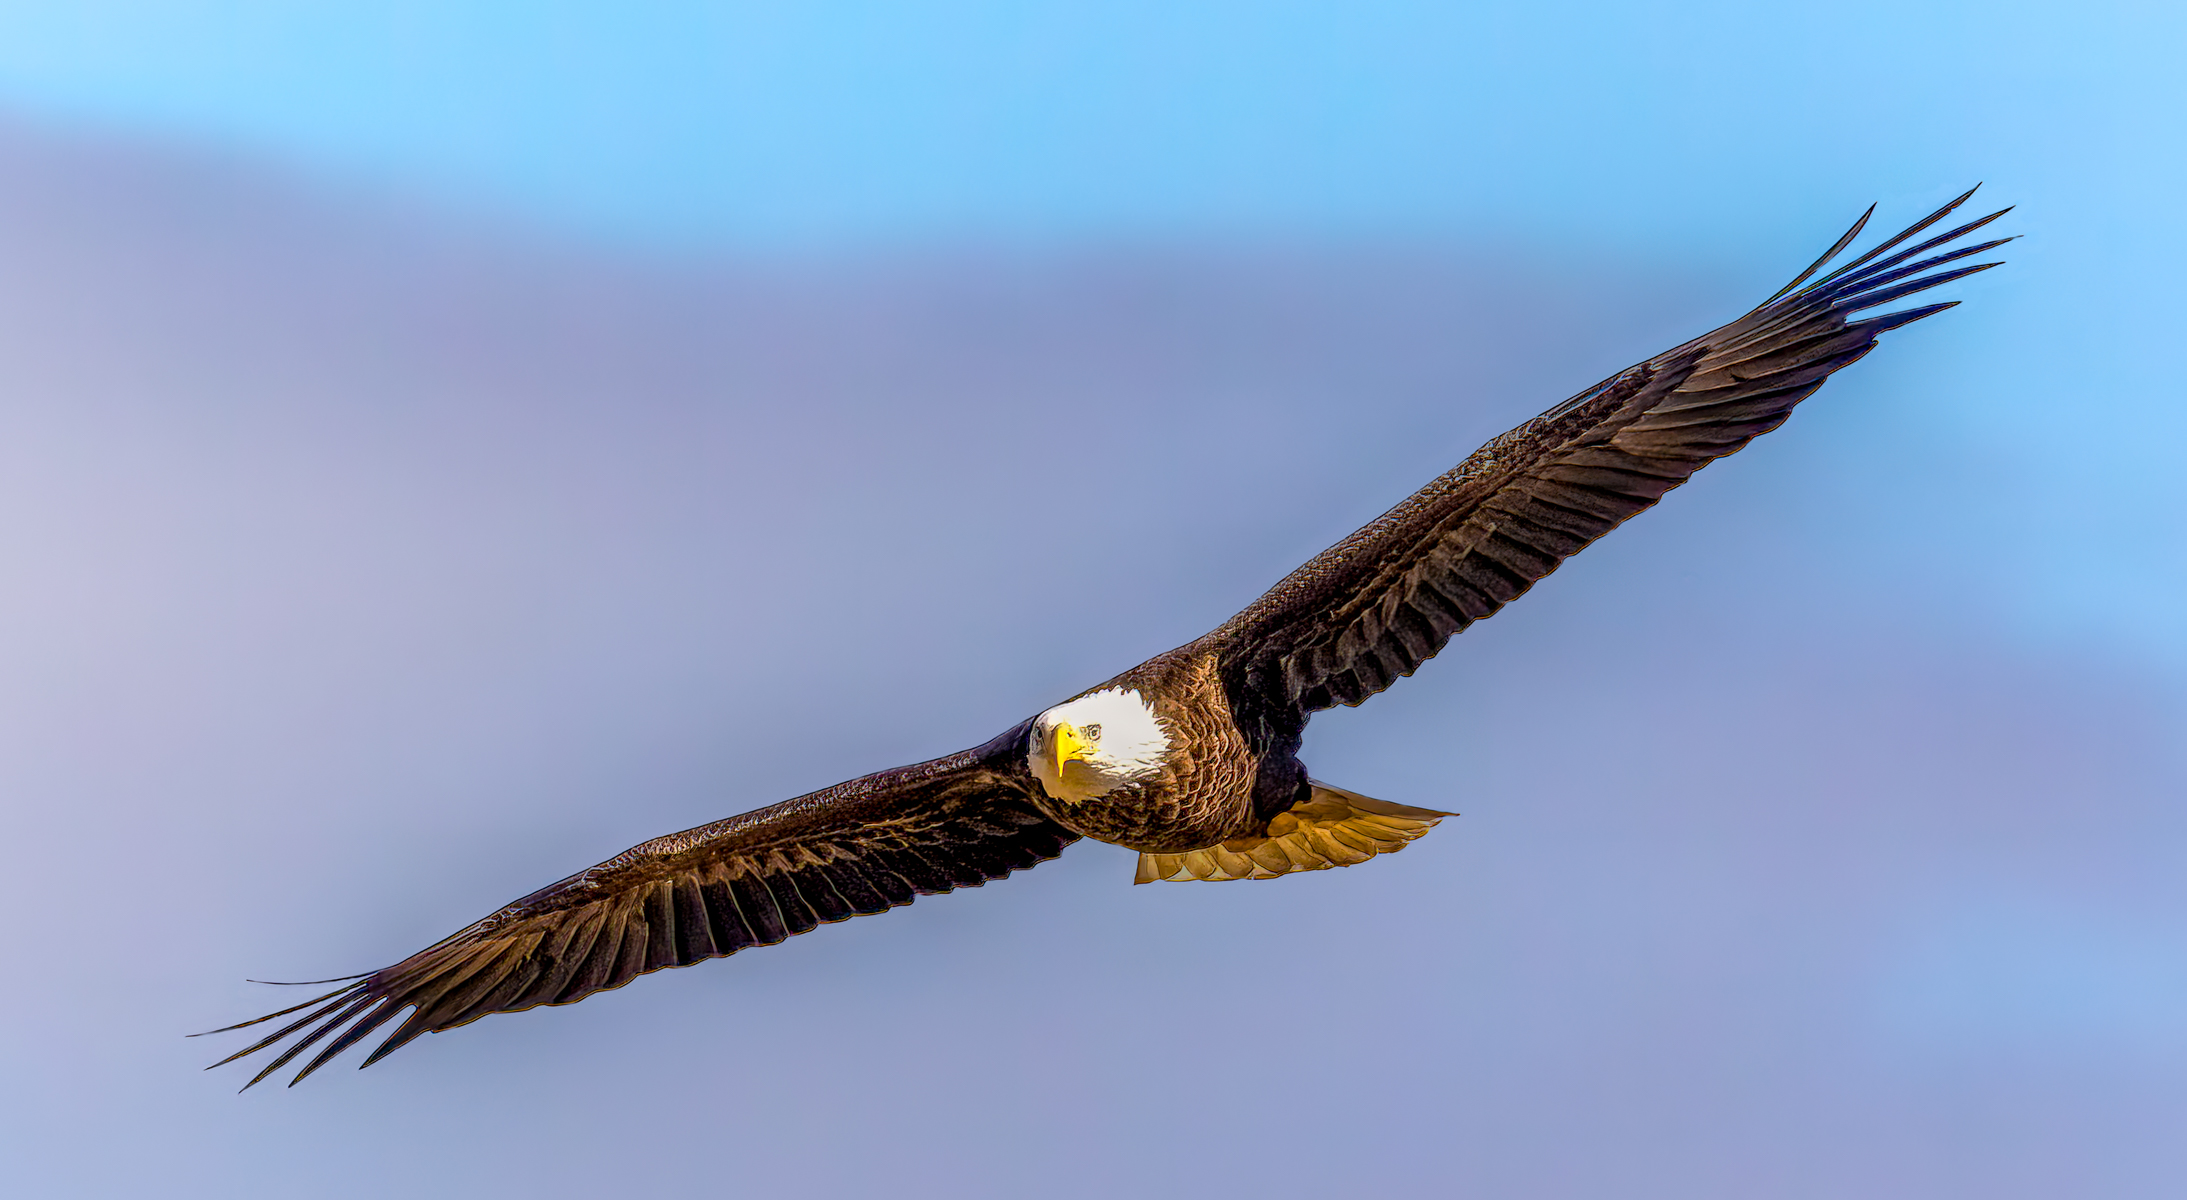 First Eagle by Brenda Fishbaugh